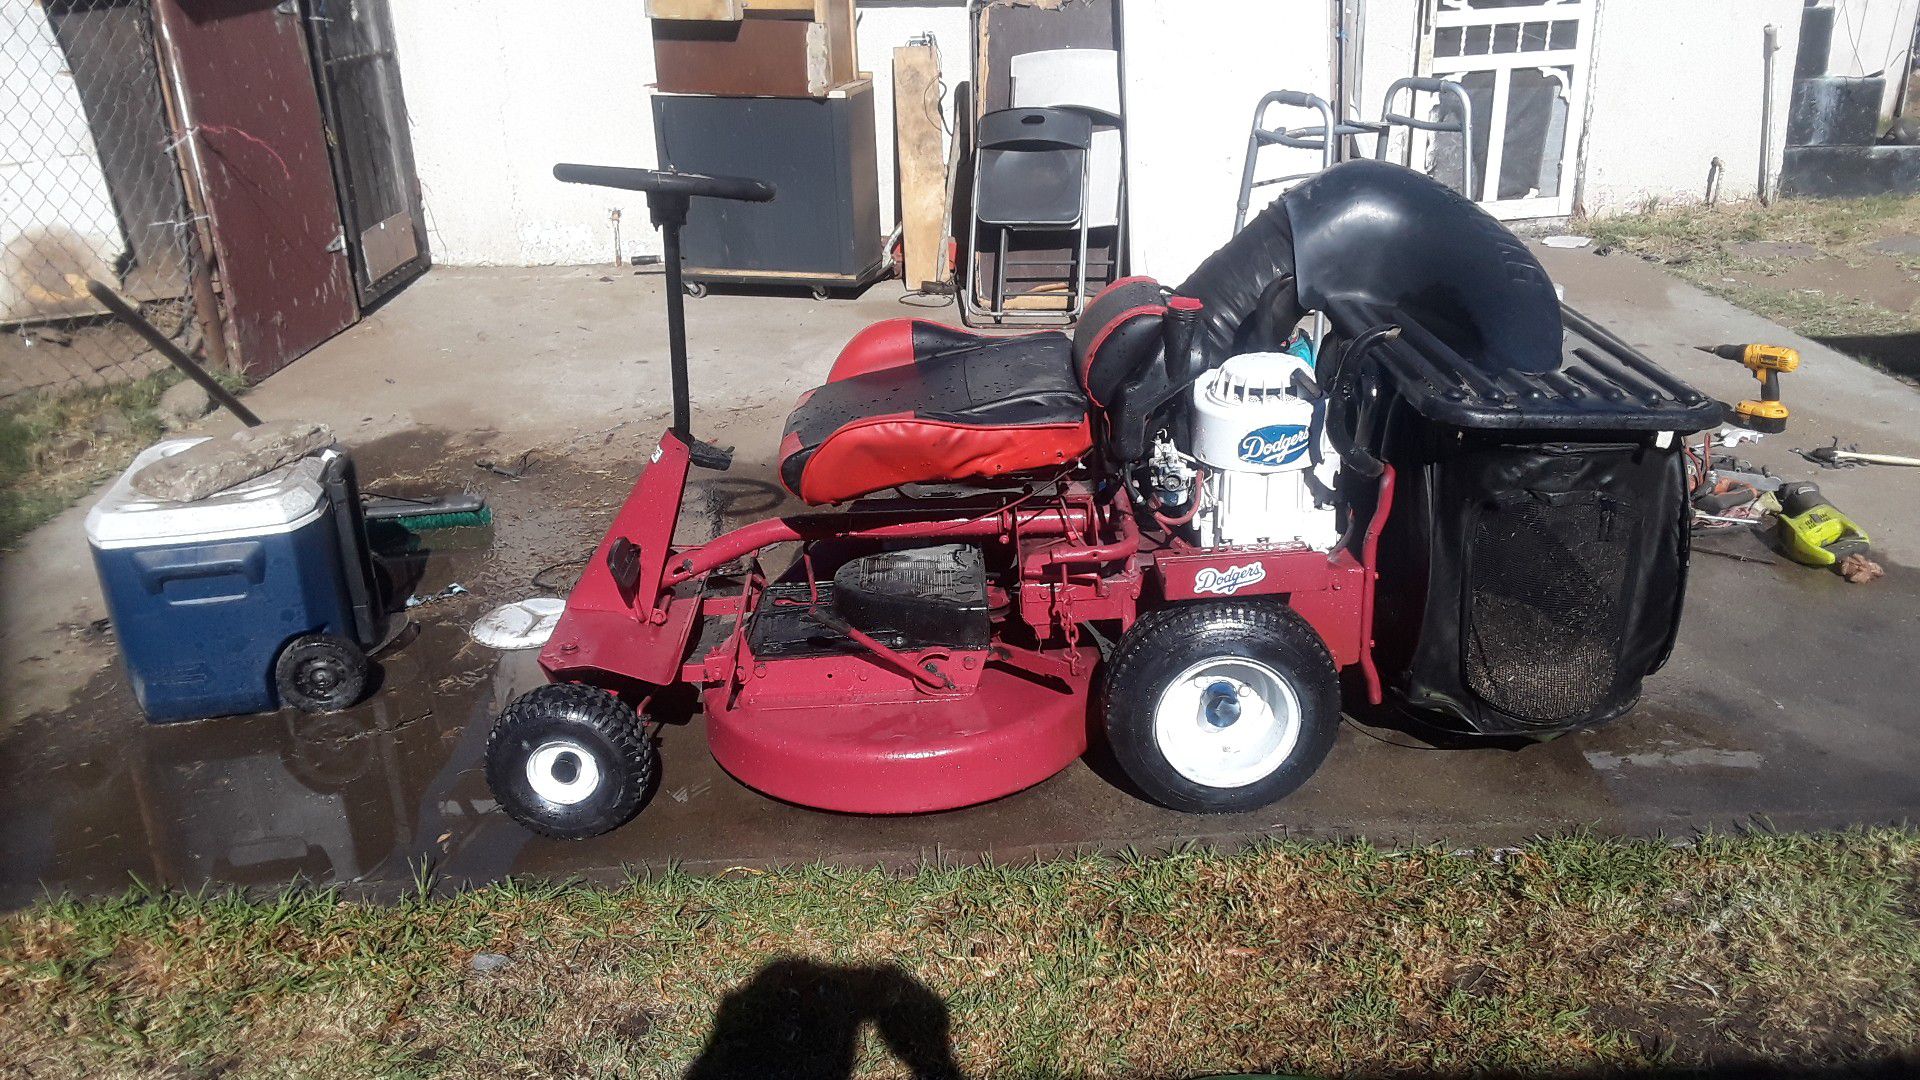 Snapper riding lawn mower